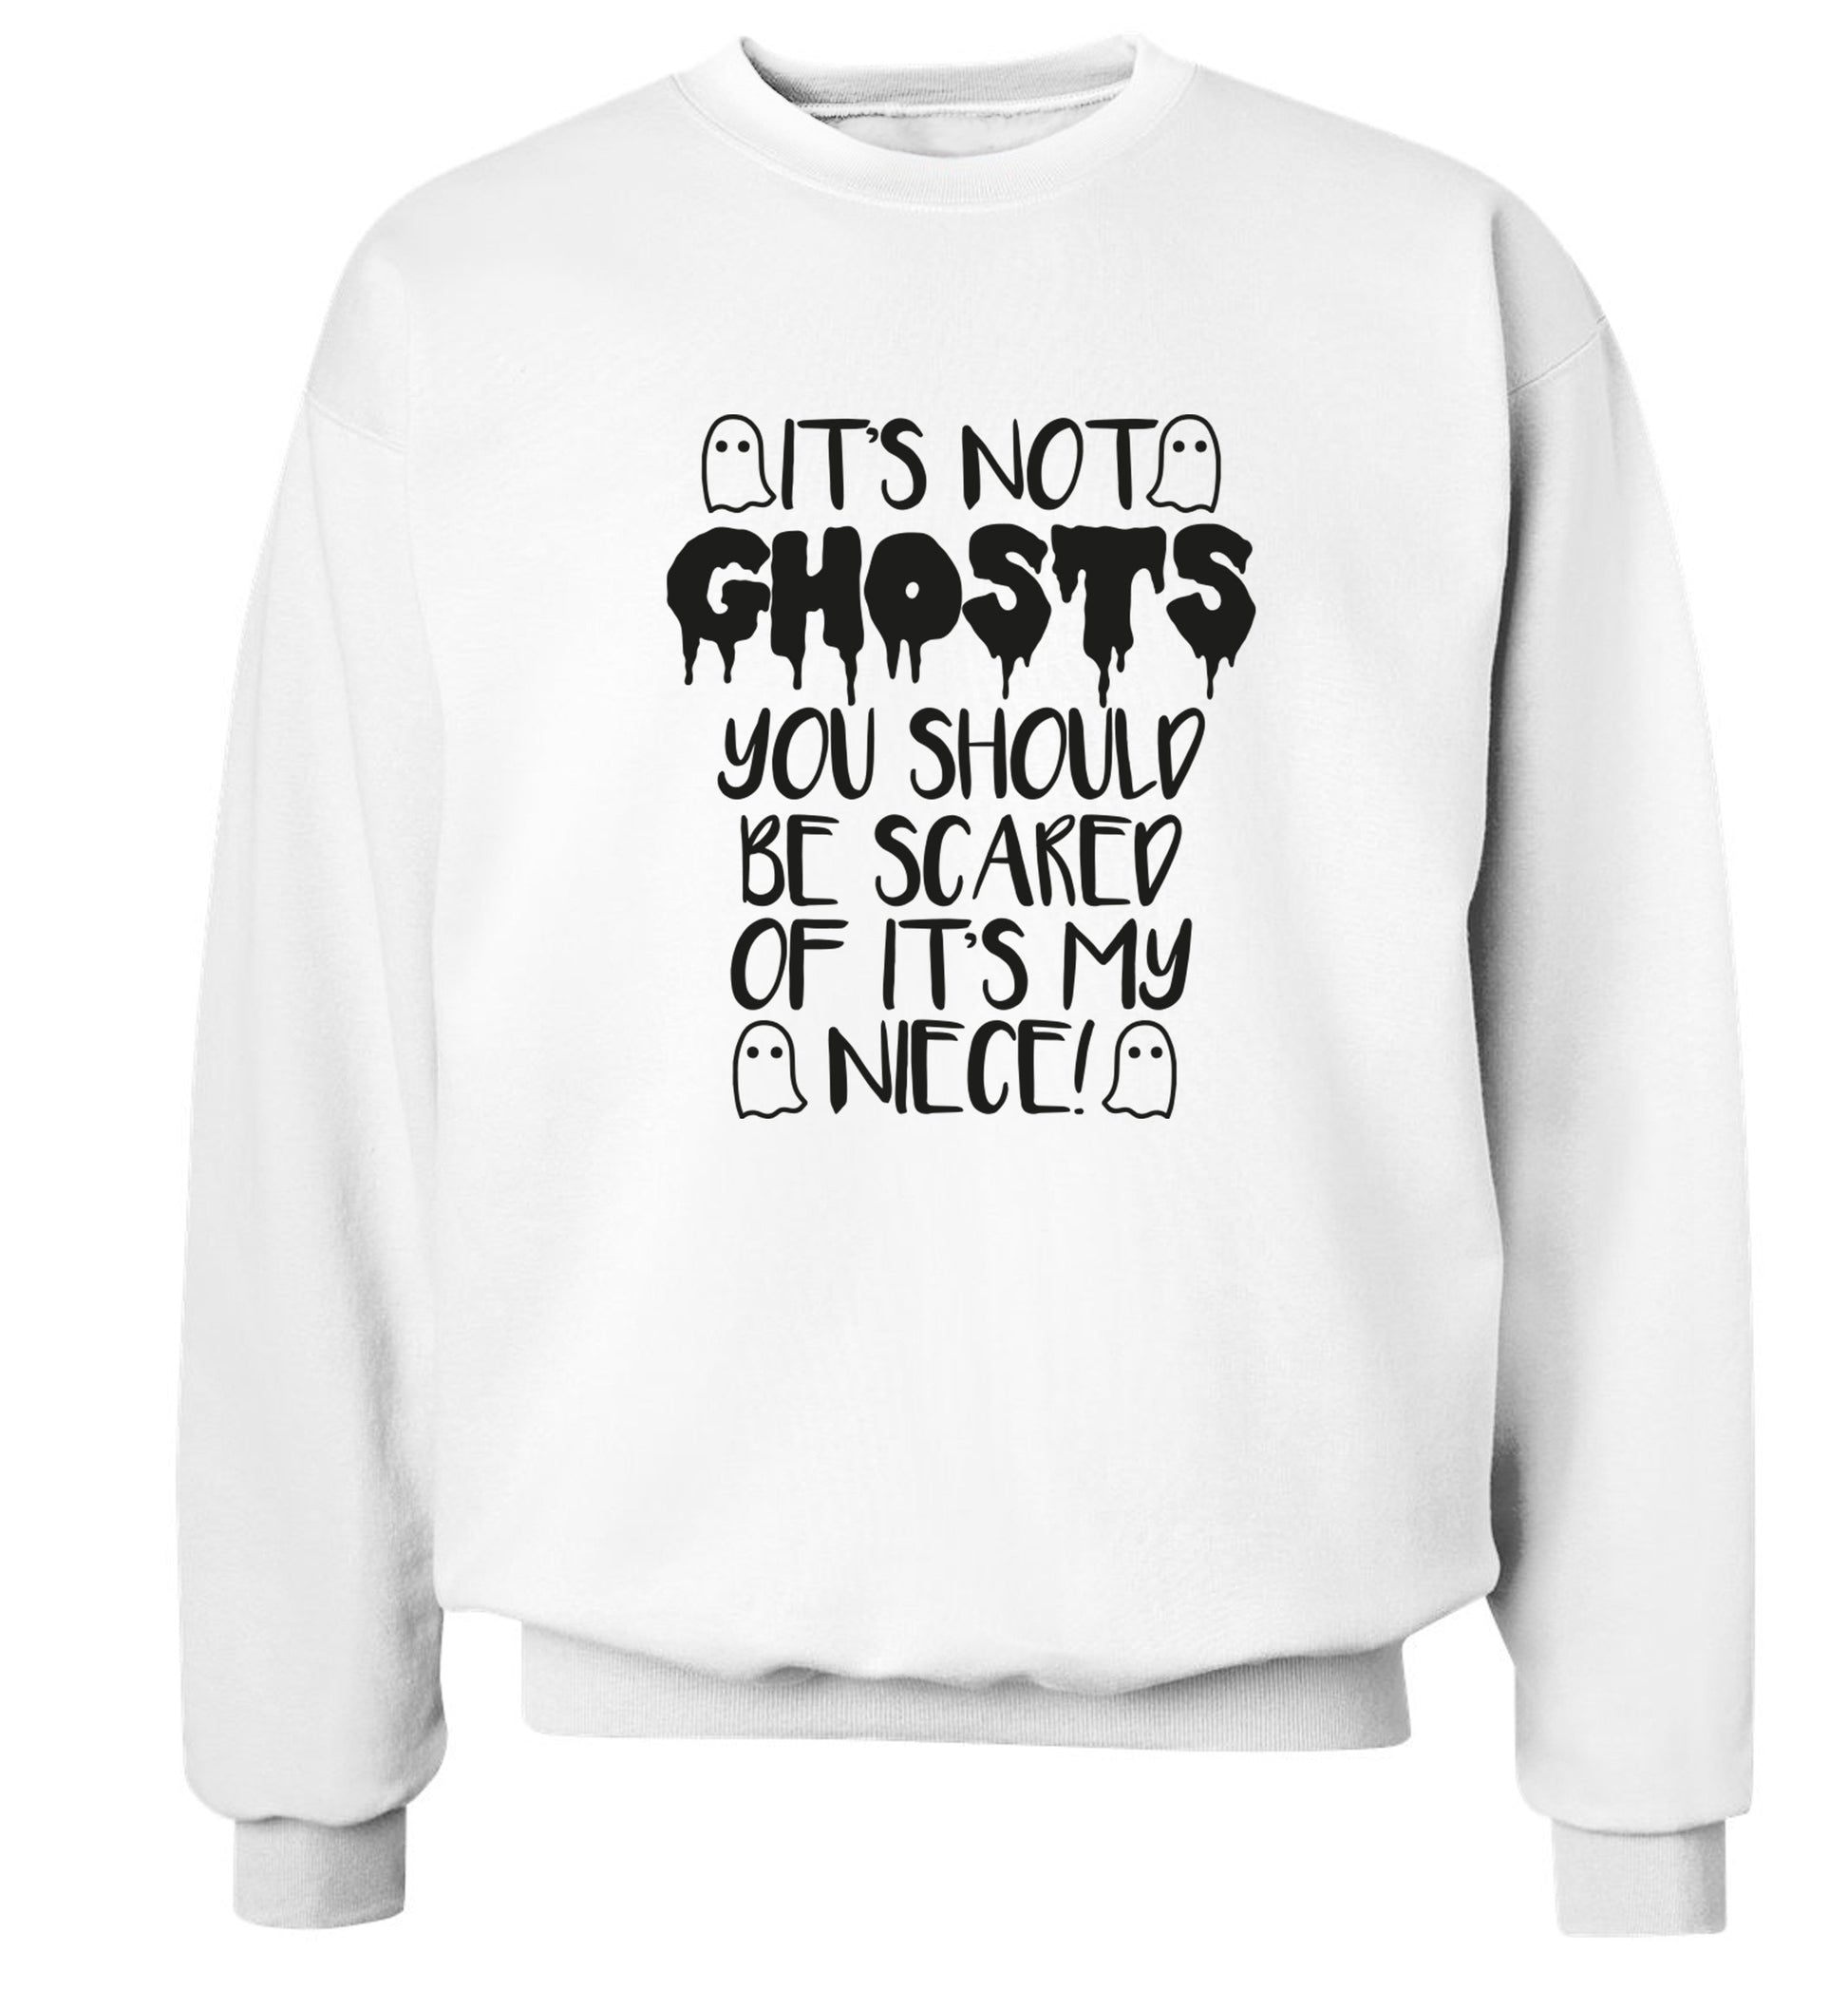 It's not ghosts you should be scared of it's my niece! Adult's unisex white Sweater 2XL